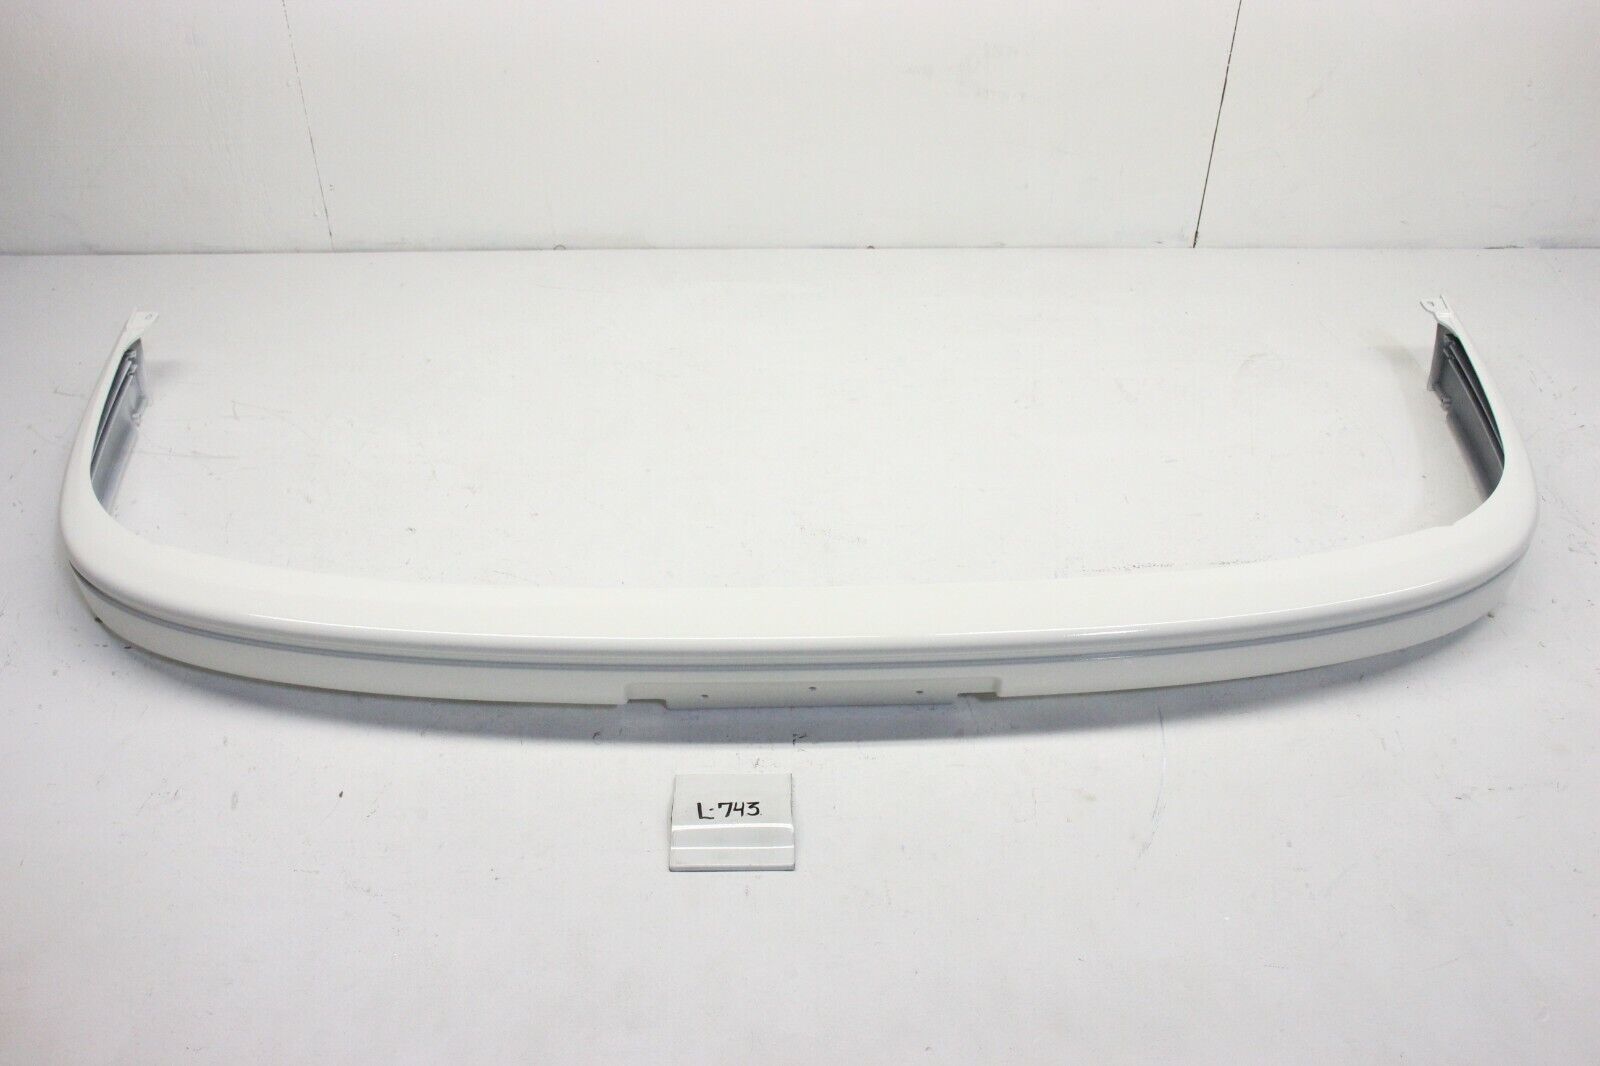 Primary image for New OEM Front Bumper Face Panel Trim 1989-1992 Mitsubishi Galant Eterna MB598573